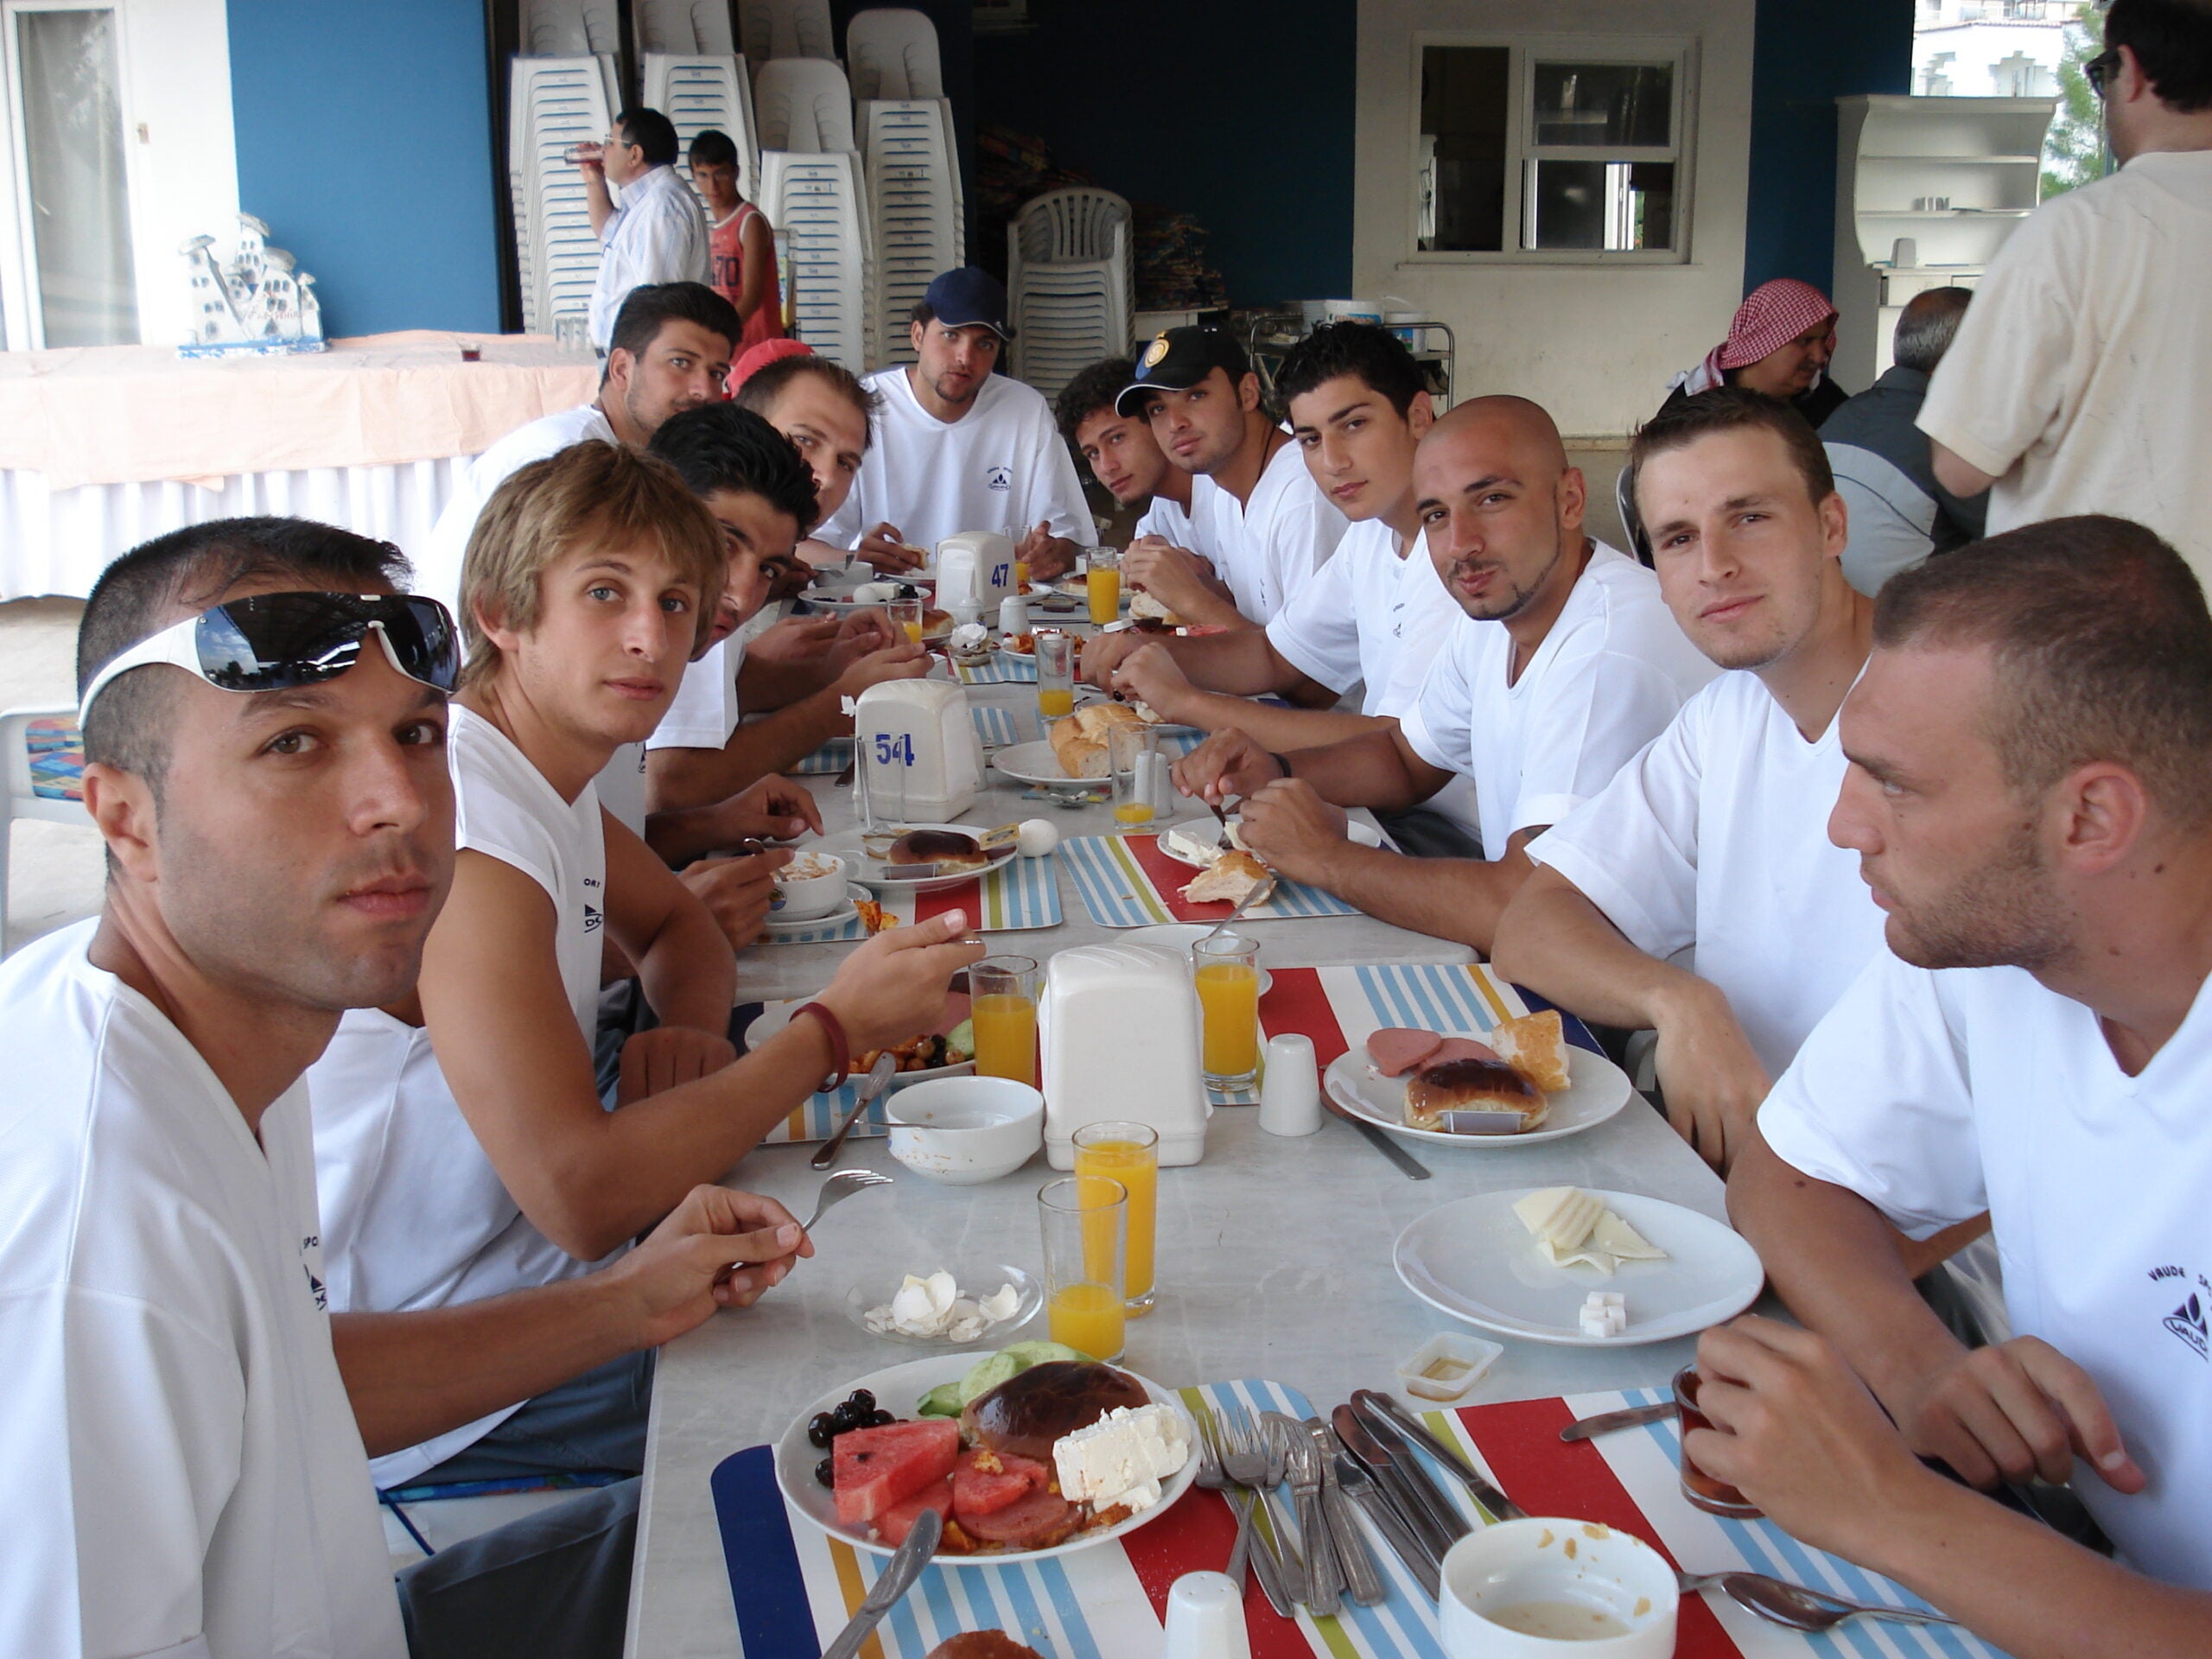 A basketball team, all wearing white, eating a meal together